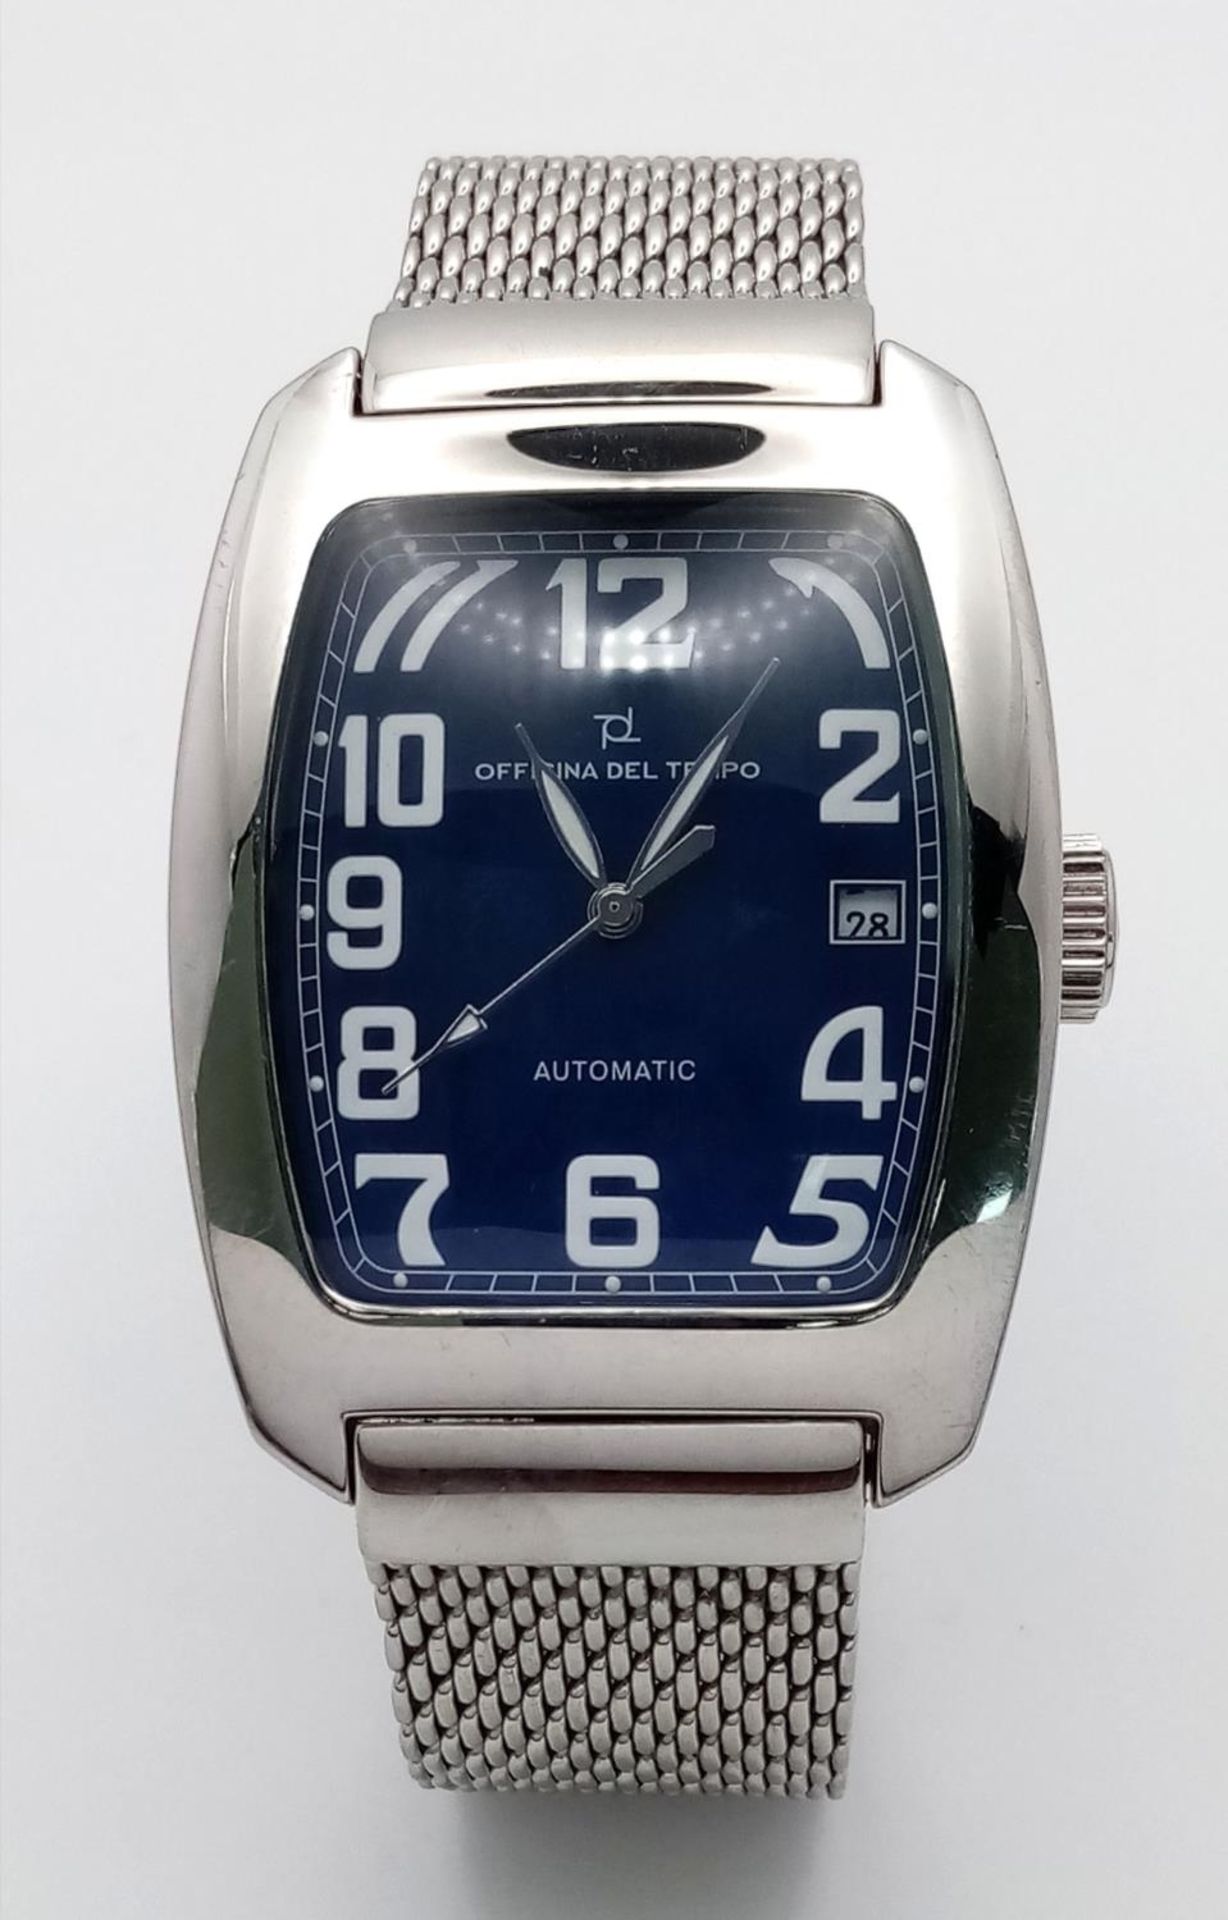 An Officina Del Tempo Automatic Gents Watch. Stainless steel bracelet and case - 38mm. Blue dial - Image 2 of 7